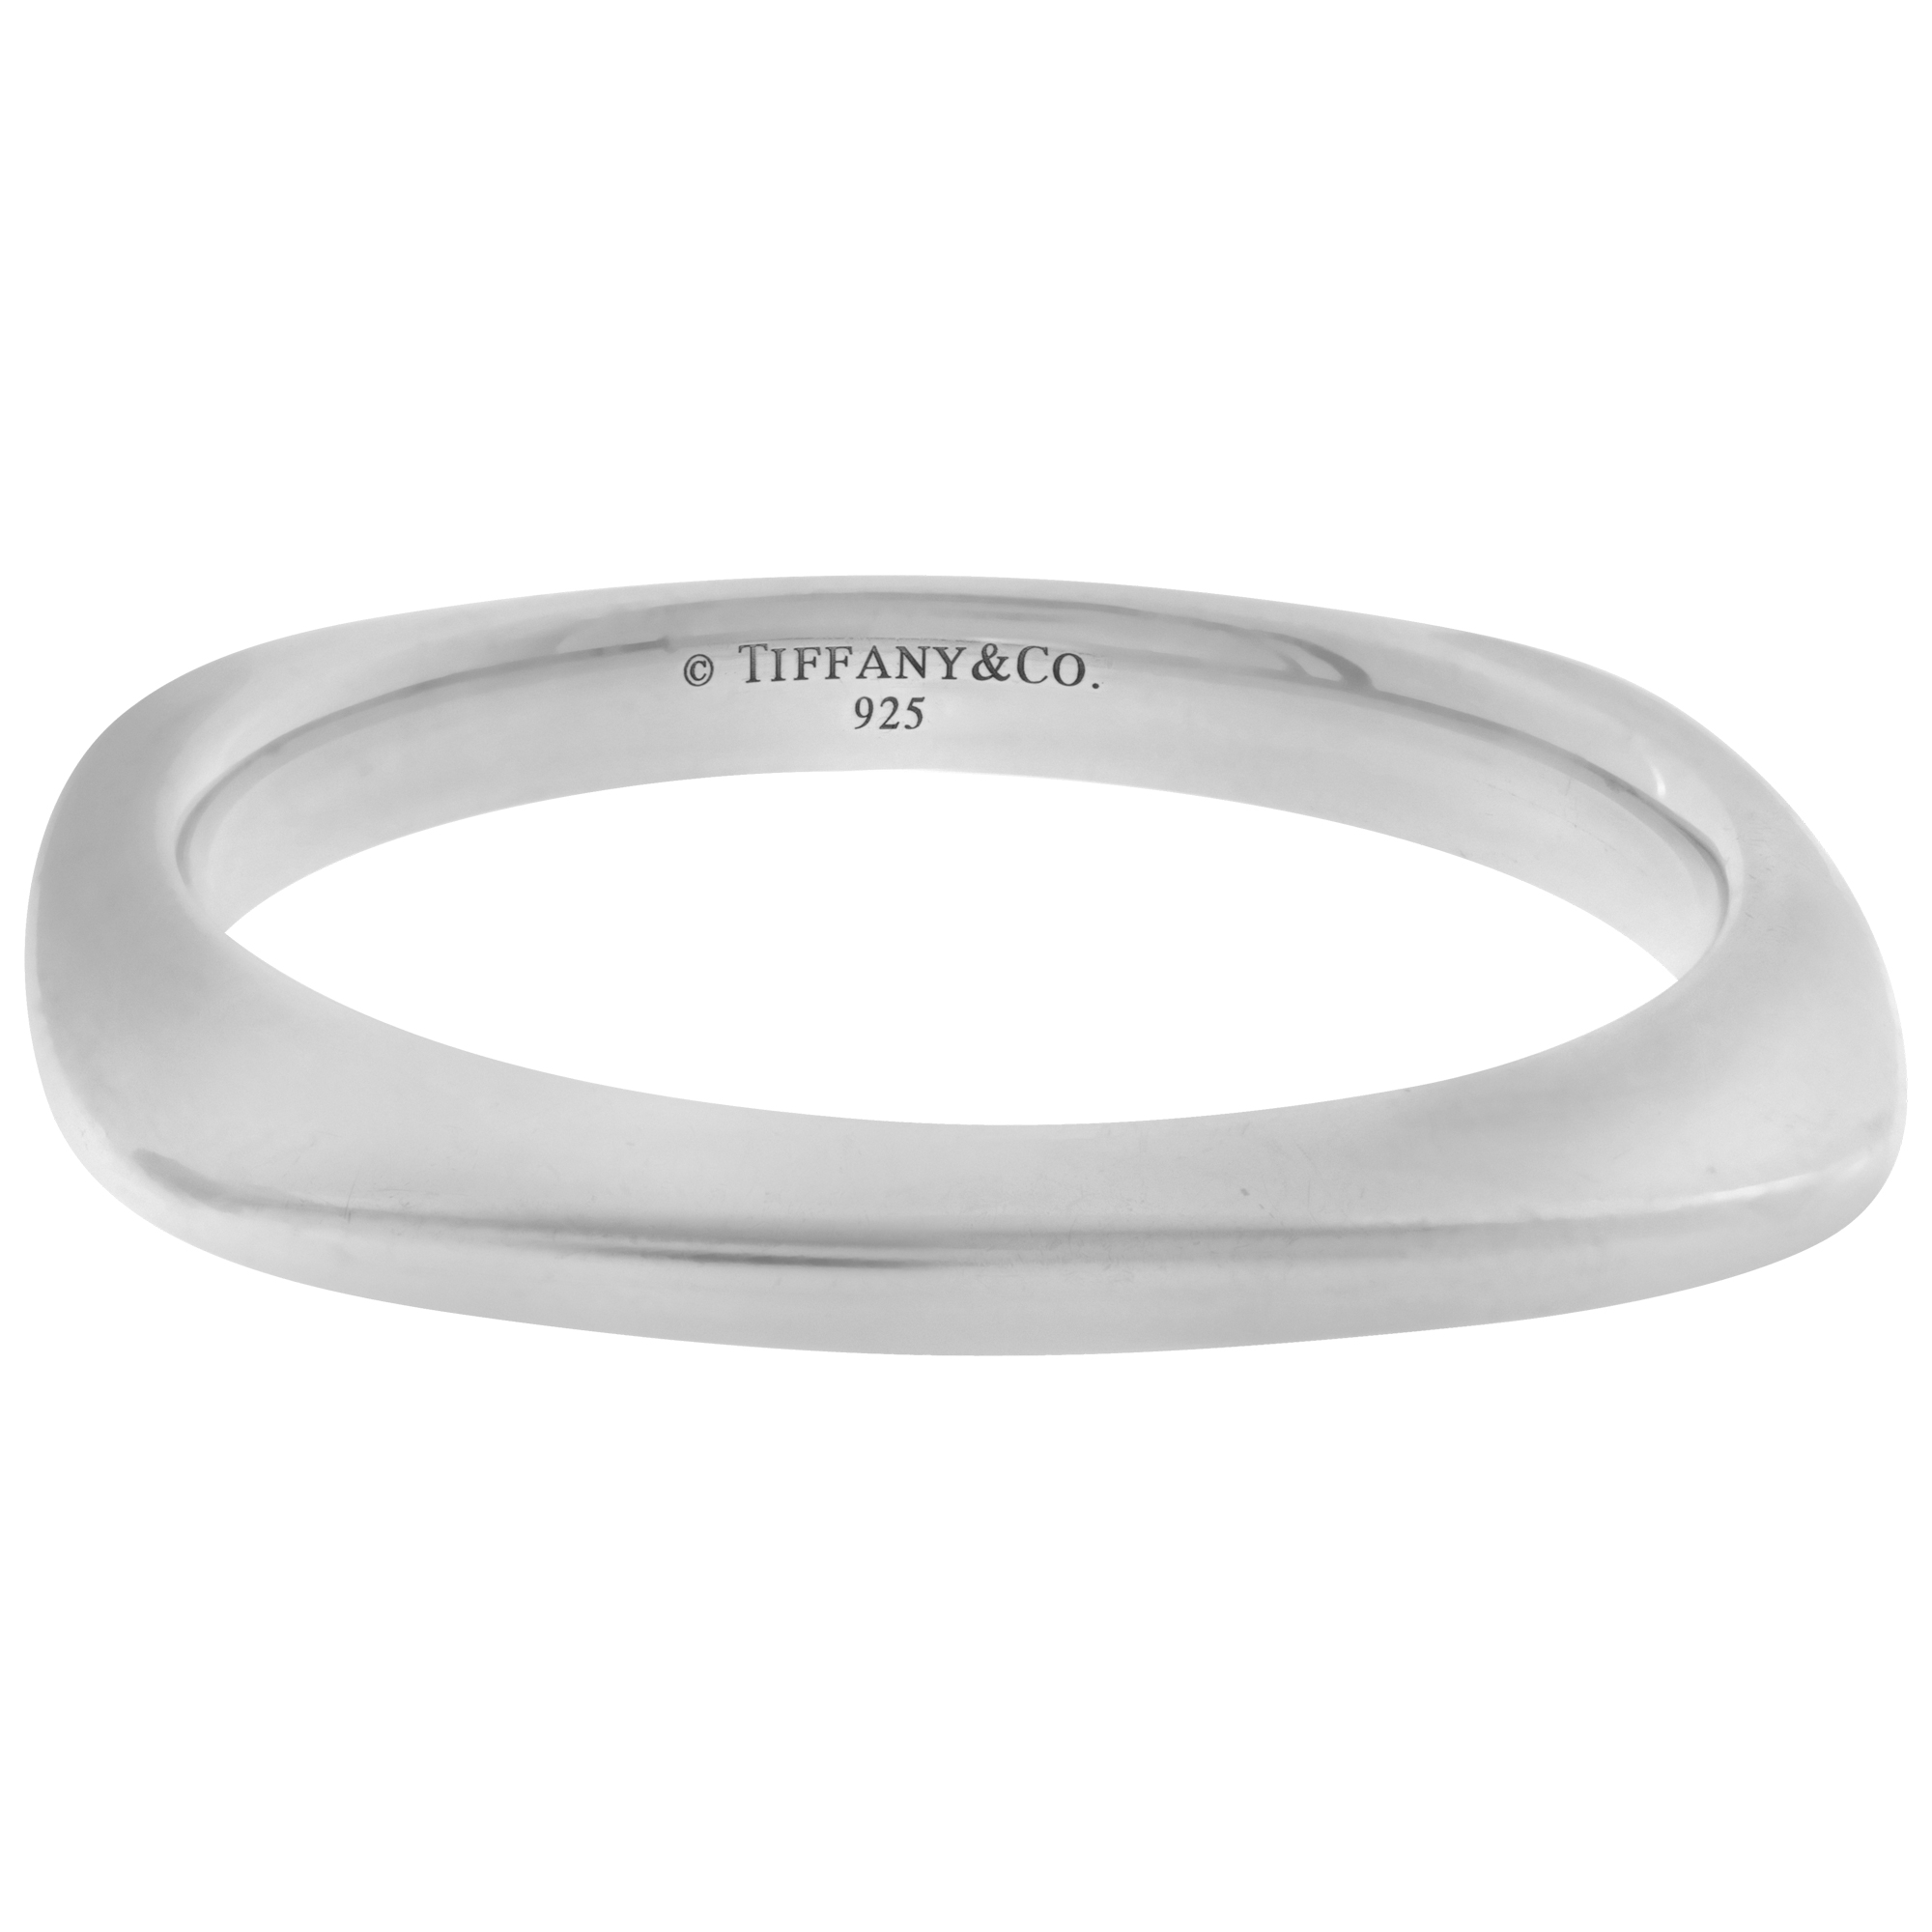 Tiffany & Co. cushion square bangle bracelet in sterling silver